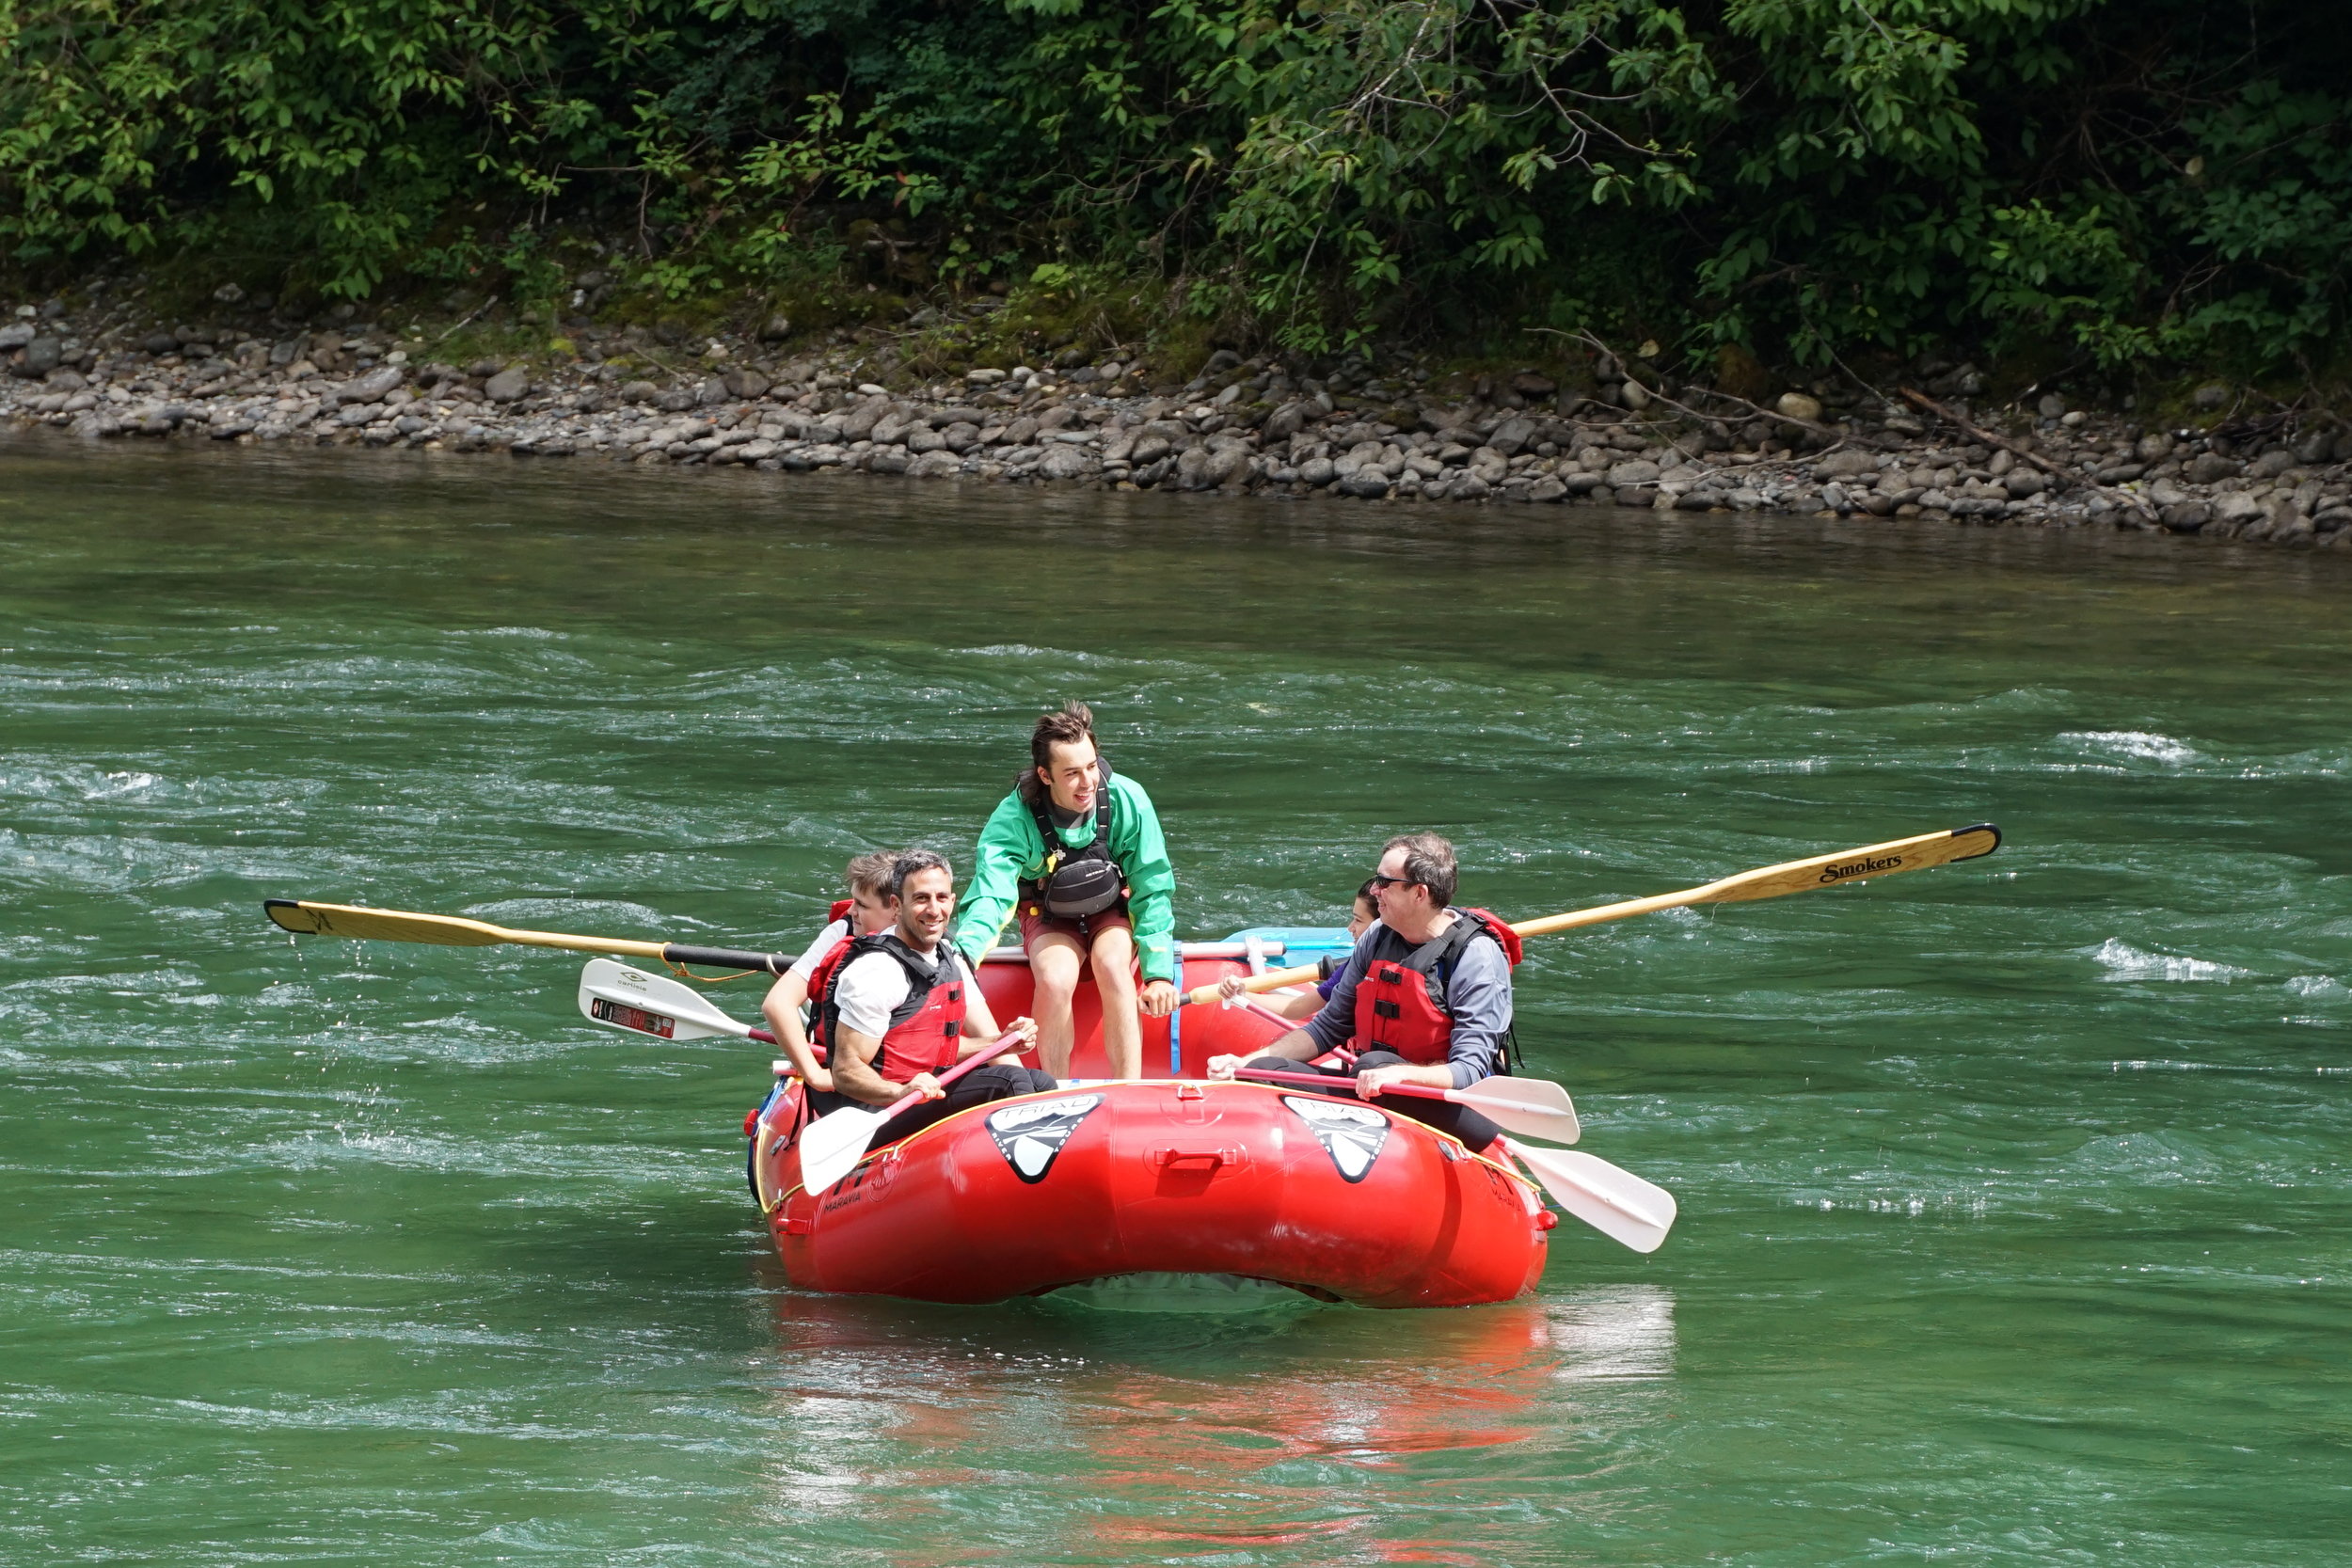 Triad River Tours uses self-bailing rafts on all of our rivers to ensure a safe and fun trip.